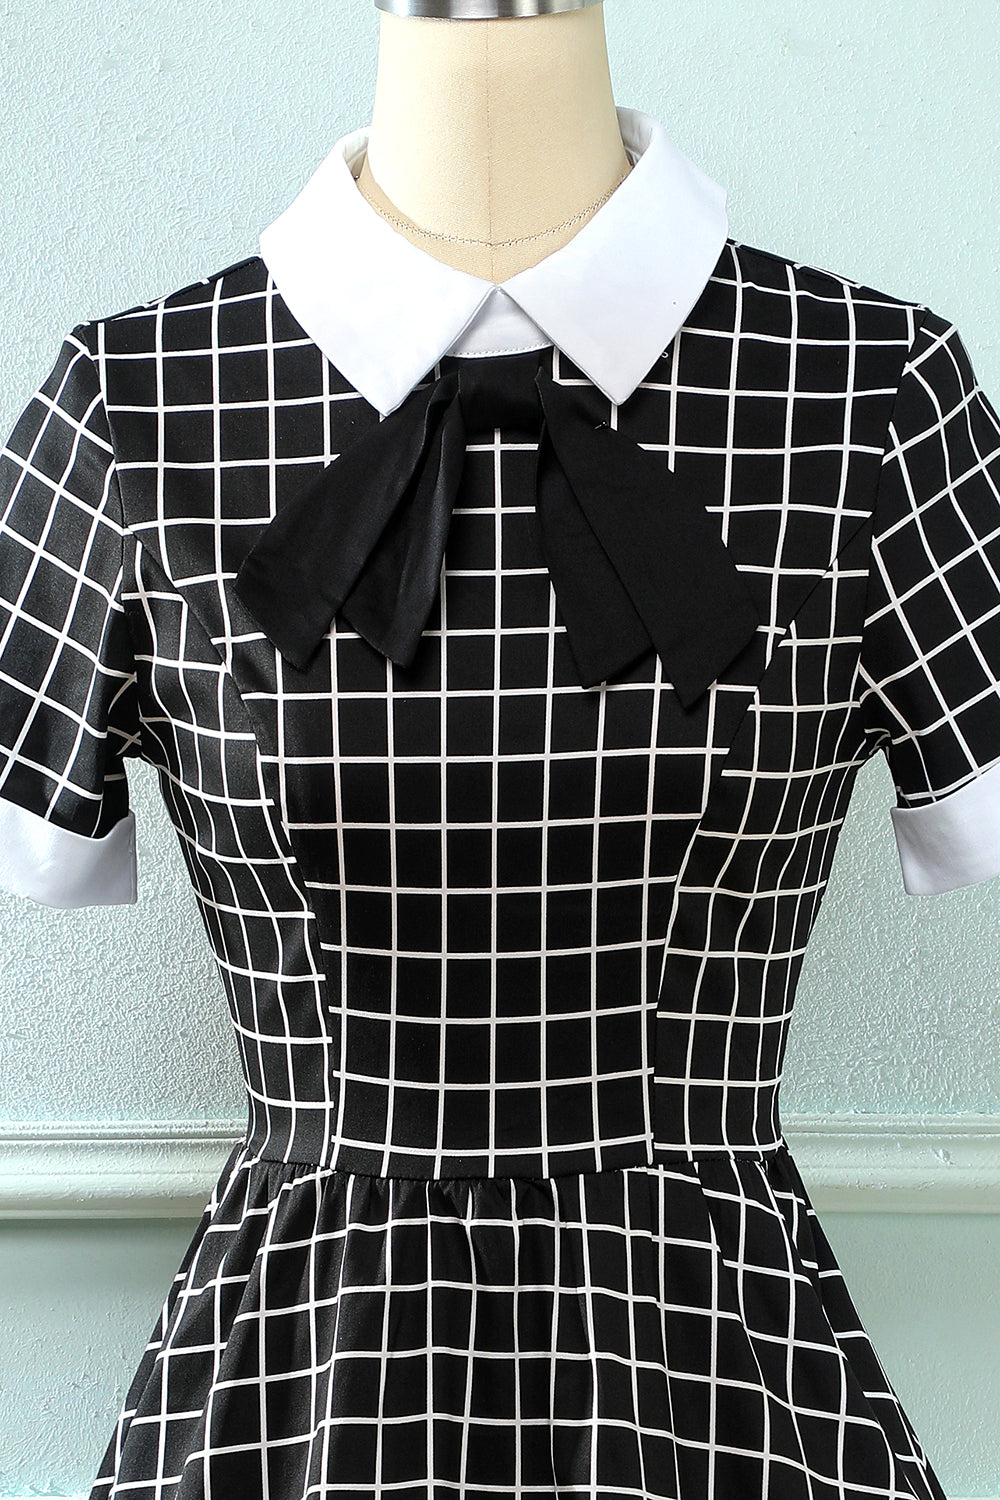 Plaid 1950s Vintage Dress with Bow